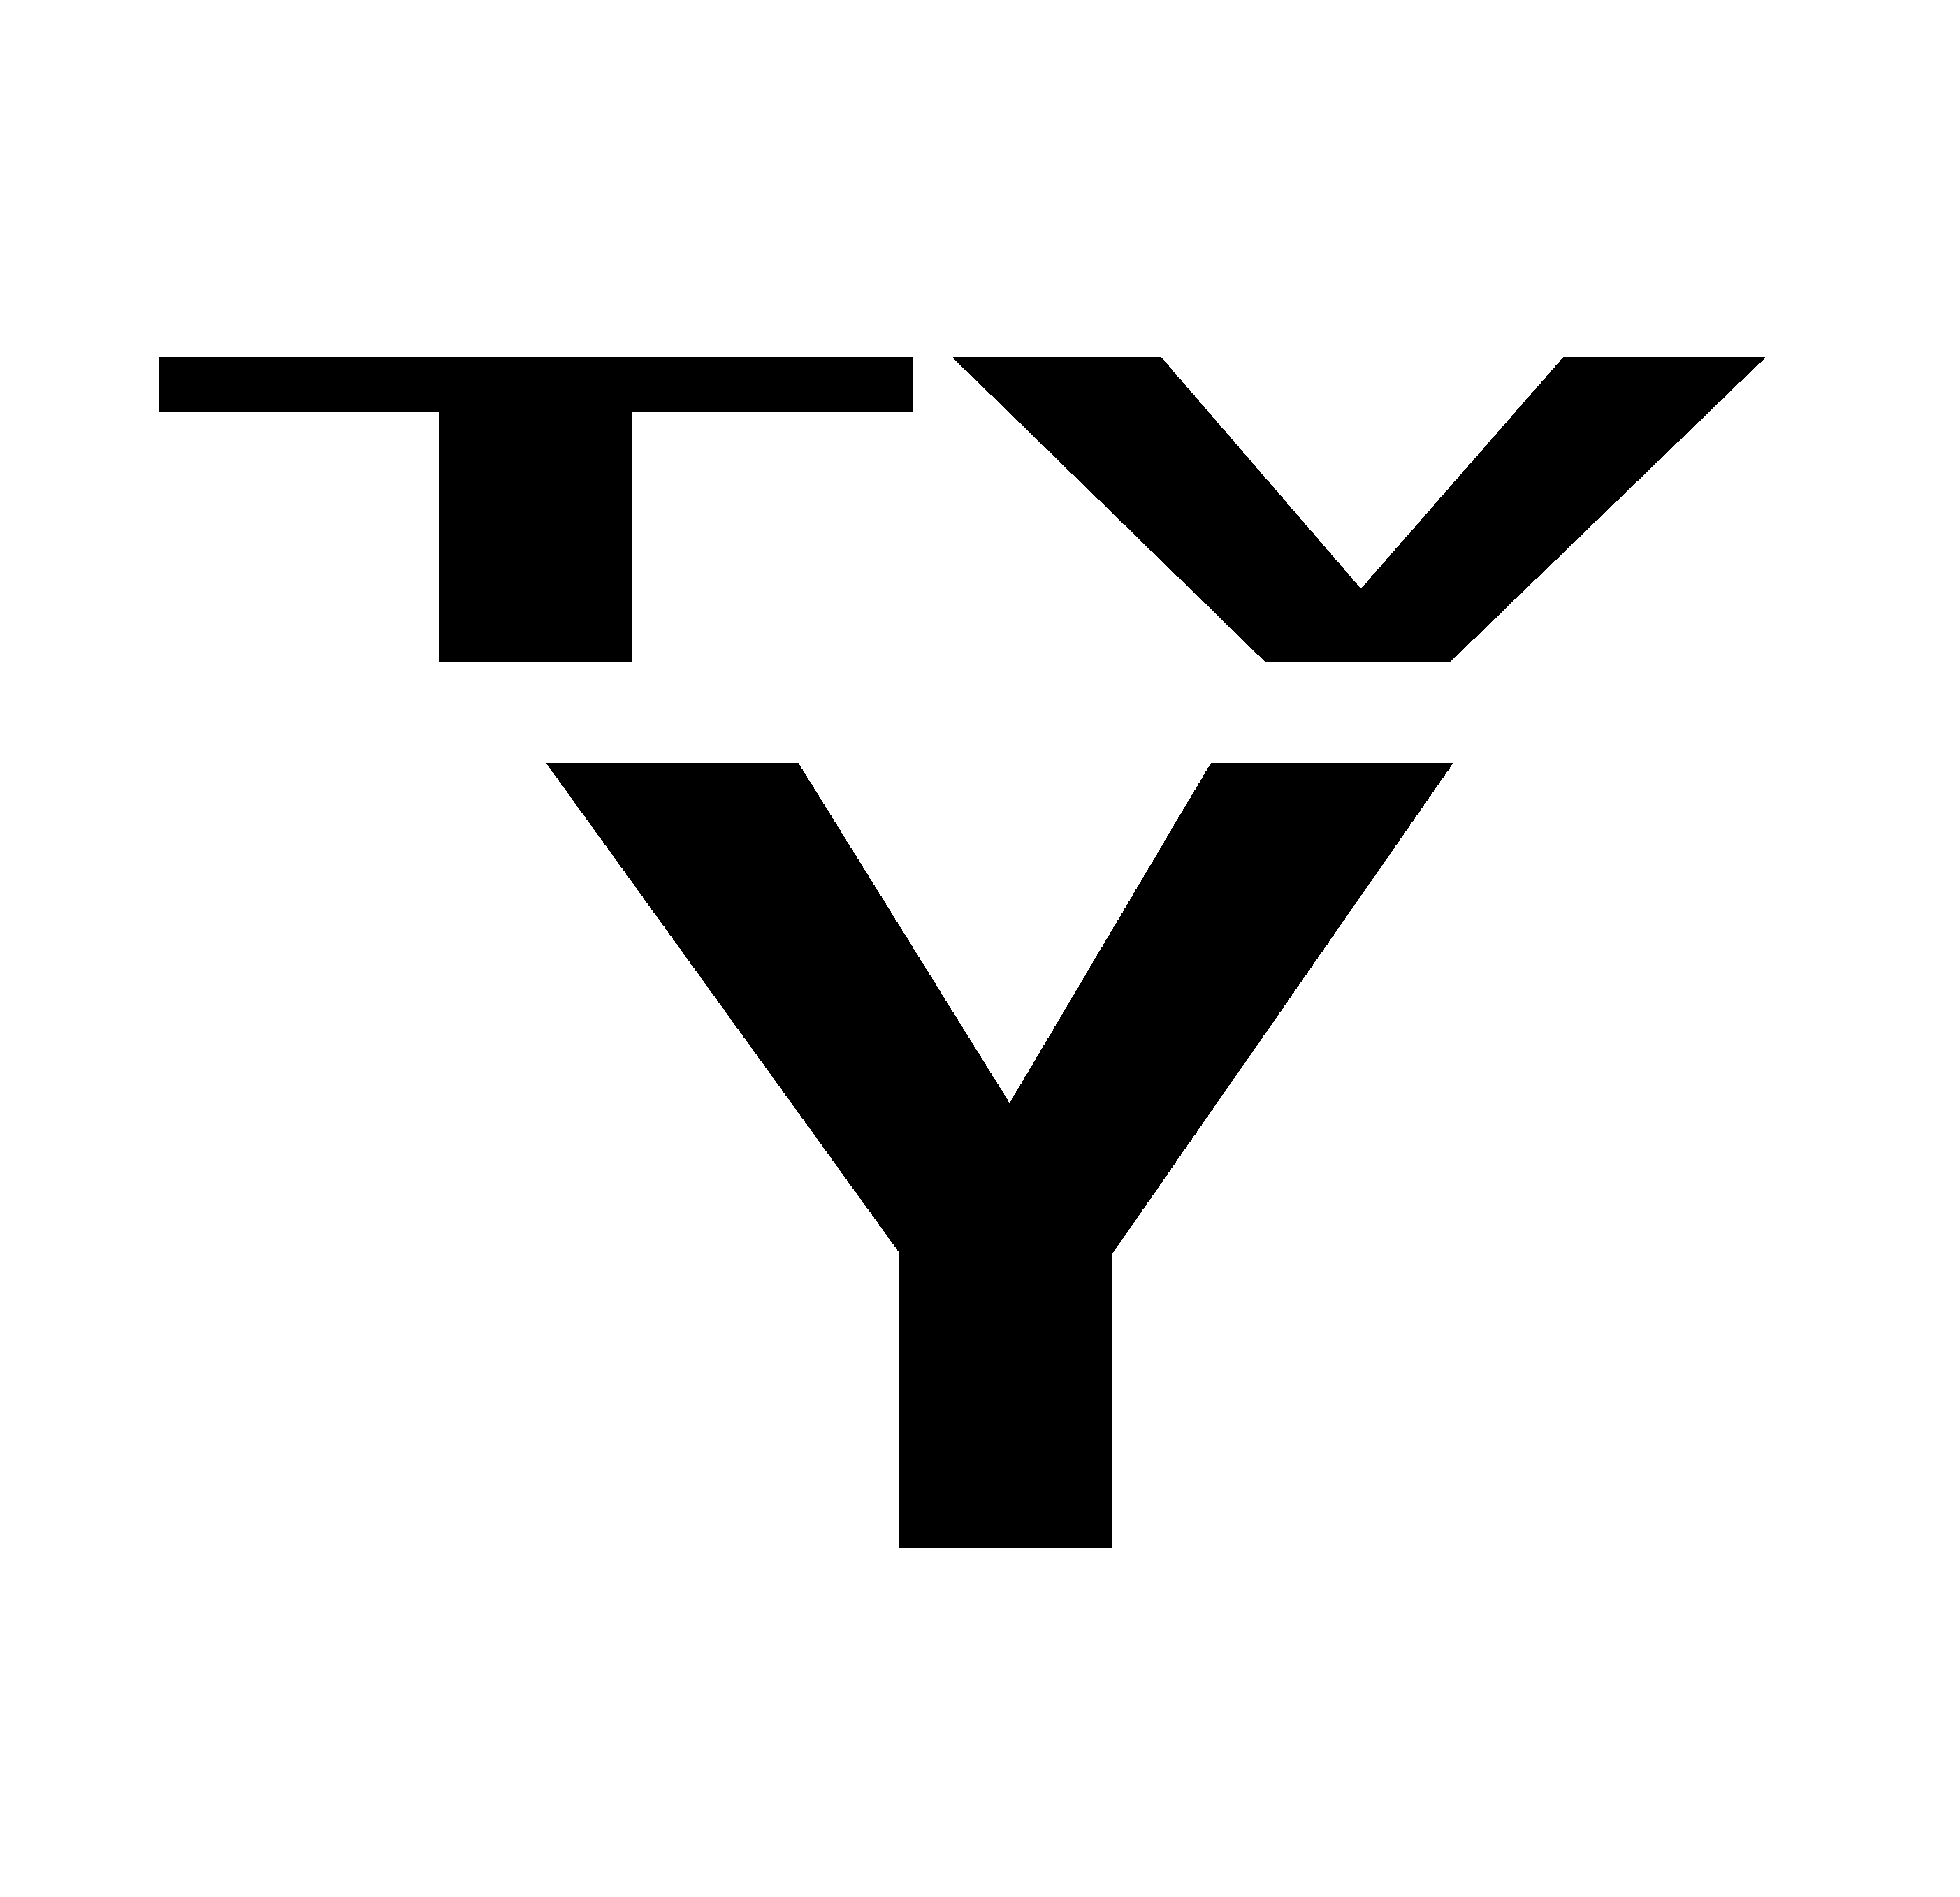 Black Y Logo - File:White TV-Y icon.png - Wikimedia Commons